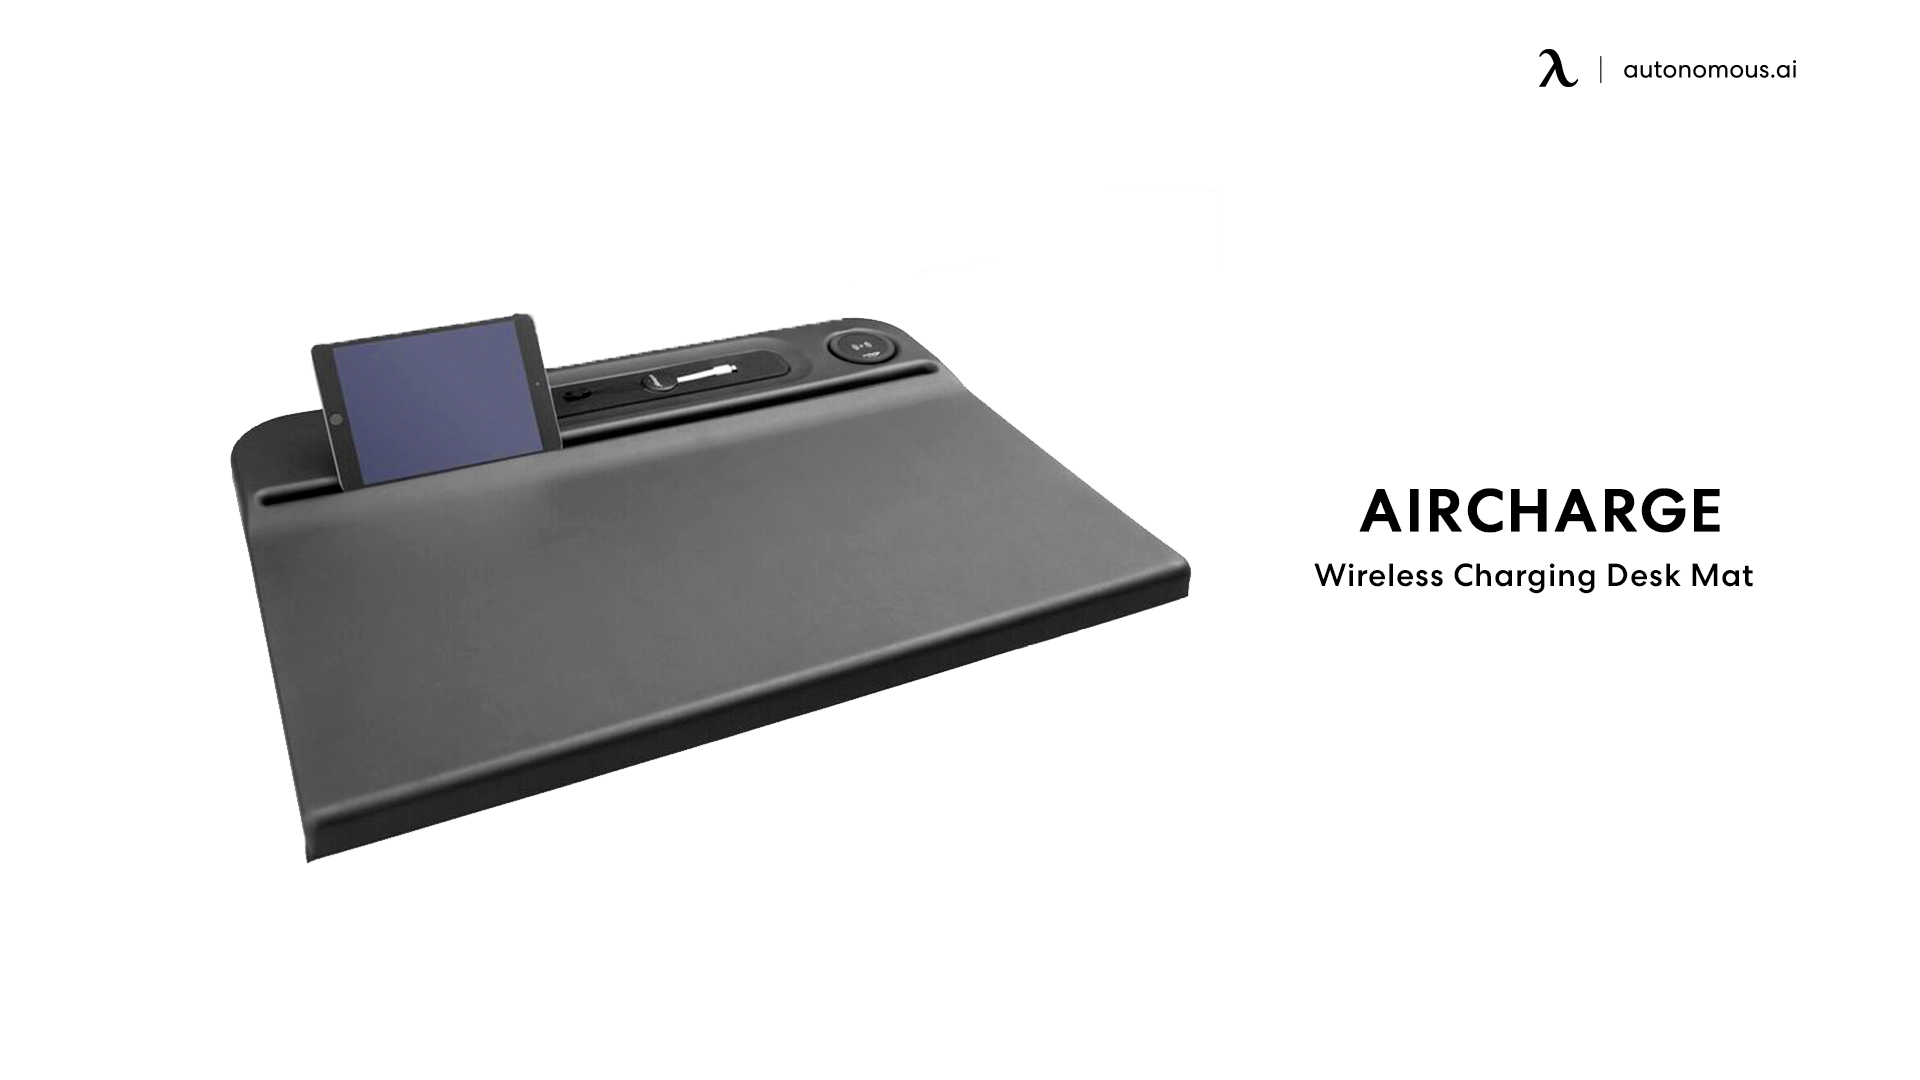 Aircharge Wireless Charging Desk Mat